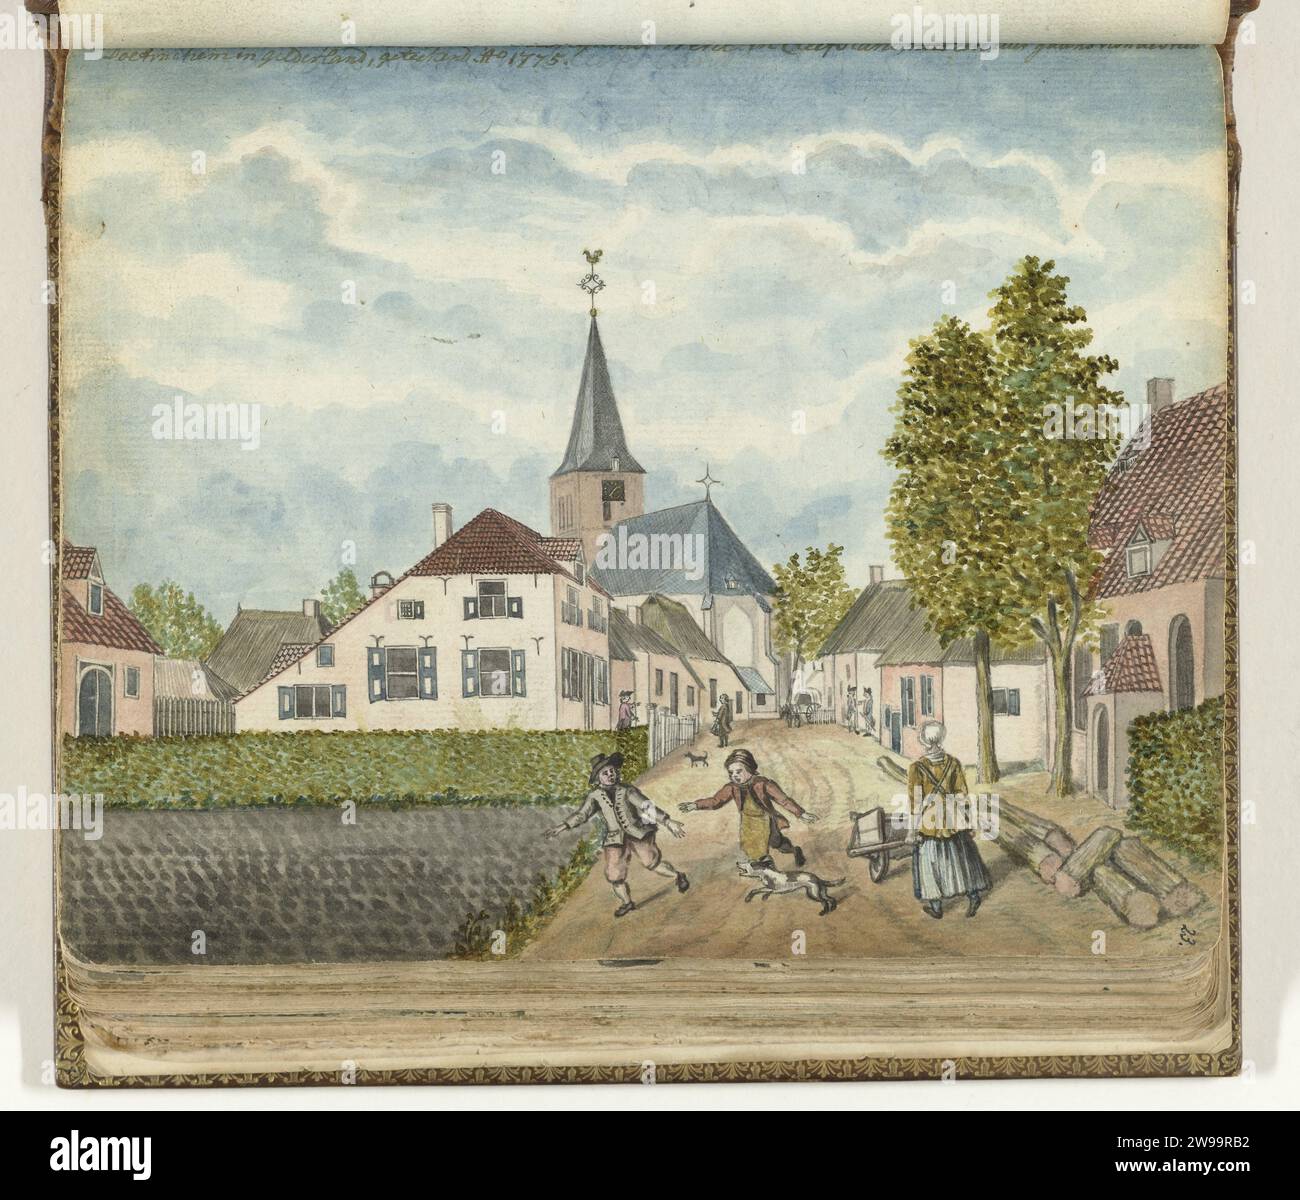 The village of Wehl in Cleefsland, Jan Brandes, 1775 drawing Color drawing. Face of the village of Wehl 'an hour gang' by Doetinchem. A unpaved road to the church with houses on either side. Children playing in the foreground and a woman with a wheelbarrow. Behind are two men and two soldiers. With inscription. Part of Jan Brandes' sketchbook, dl. 1 (1808), p. 23. Wehl paper. pencil. watercolor (paint) brush prospect of village, silhouette of village (+ city(-scape) with figures, staffage) Wehl Stock Photo